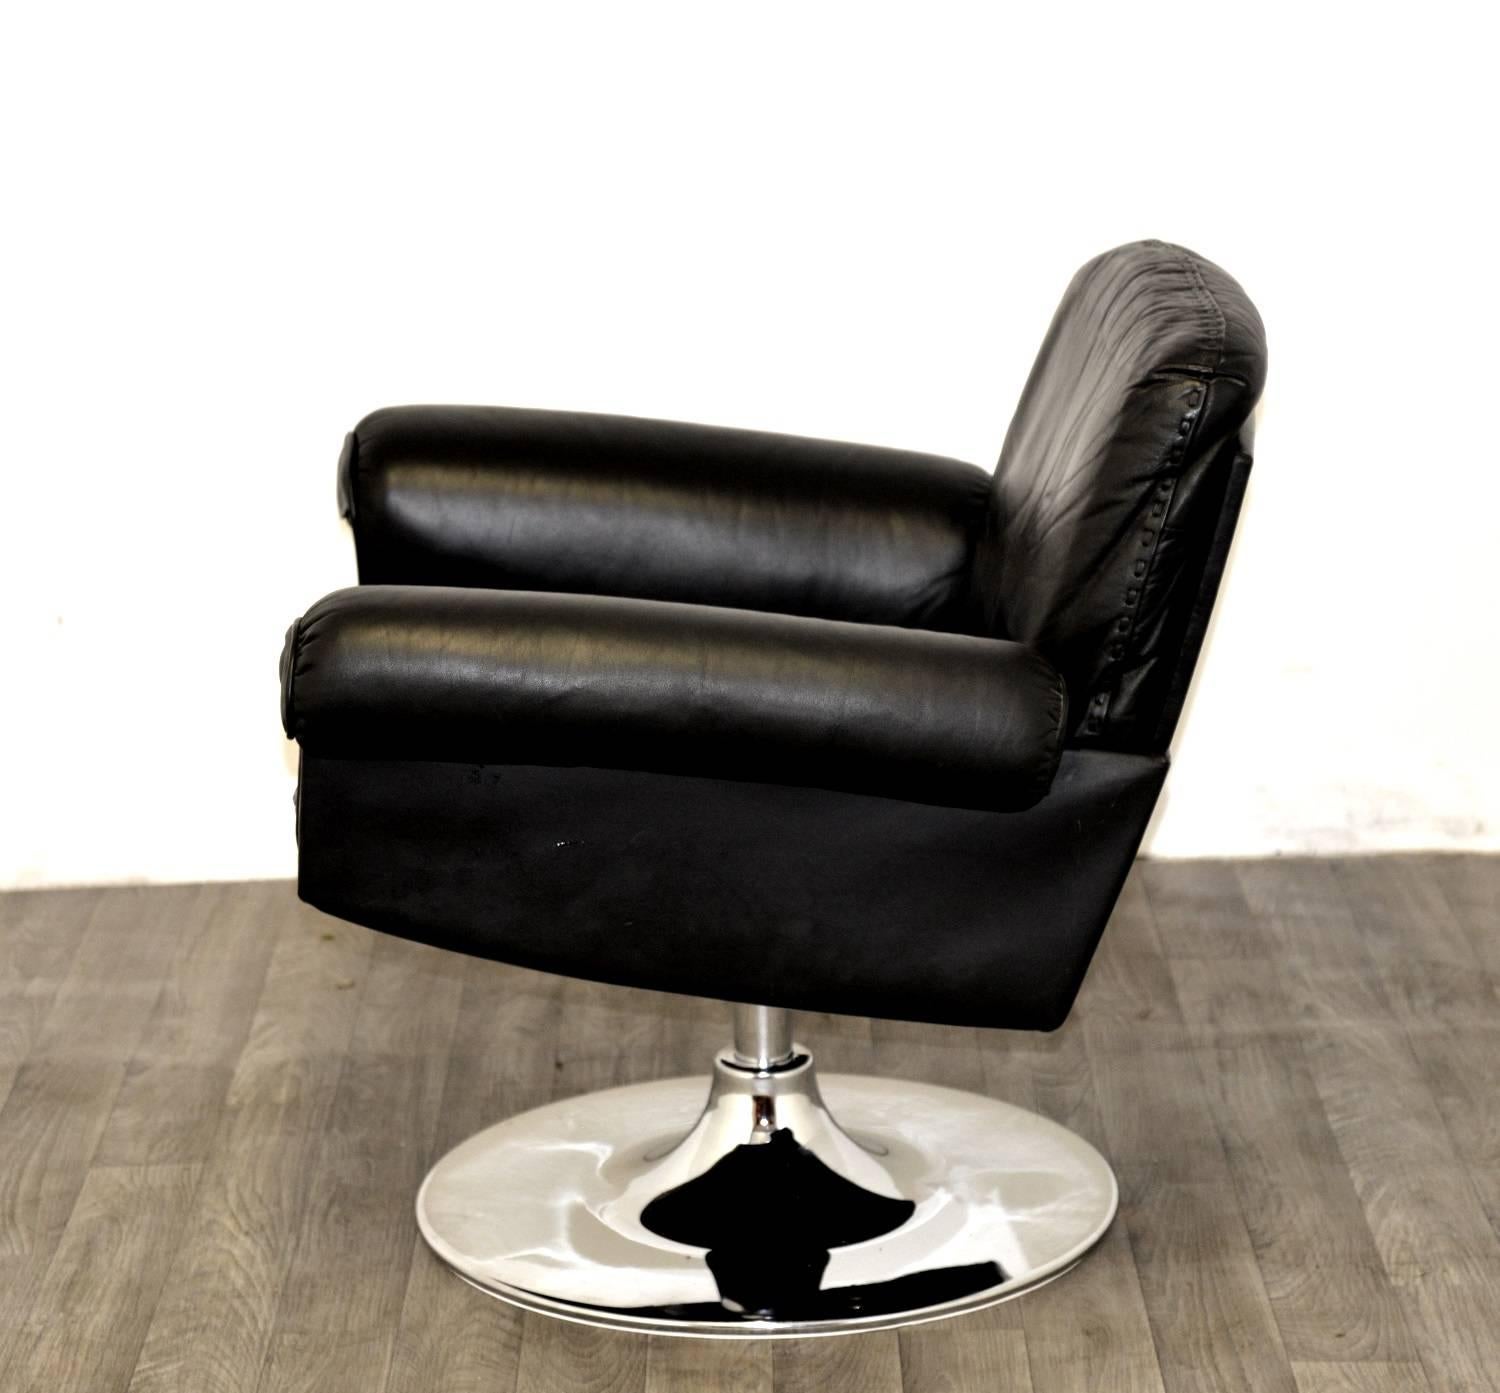 Discounted airfreight for our US and International customers ( from 2 weeks door to door ) 

The Cambridge Chair Company brings to you a vintage 1970s De Sede DS 31 swivel lounge armchair in stunning soft black aniline leather with superb whipstitch